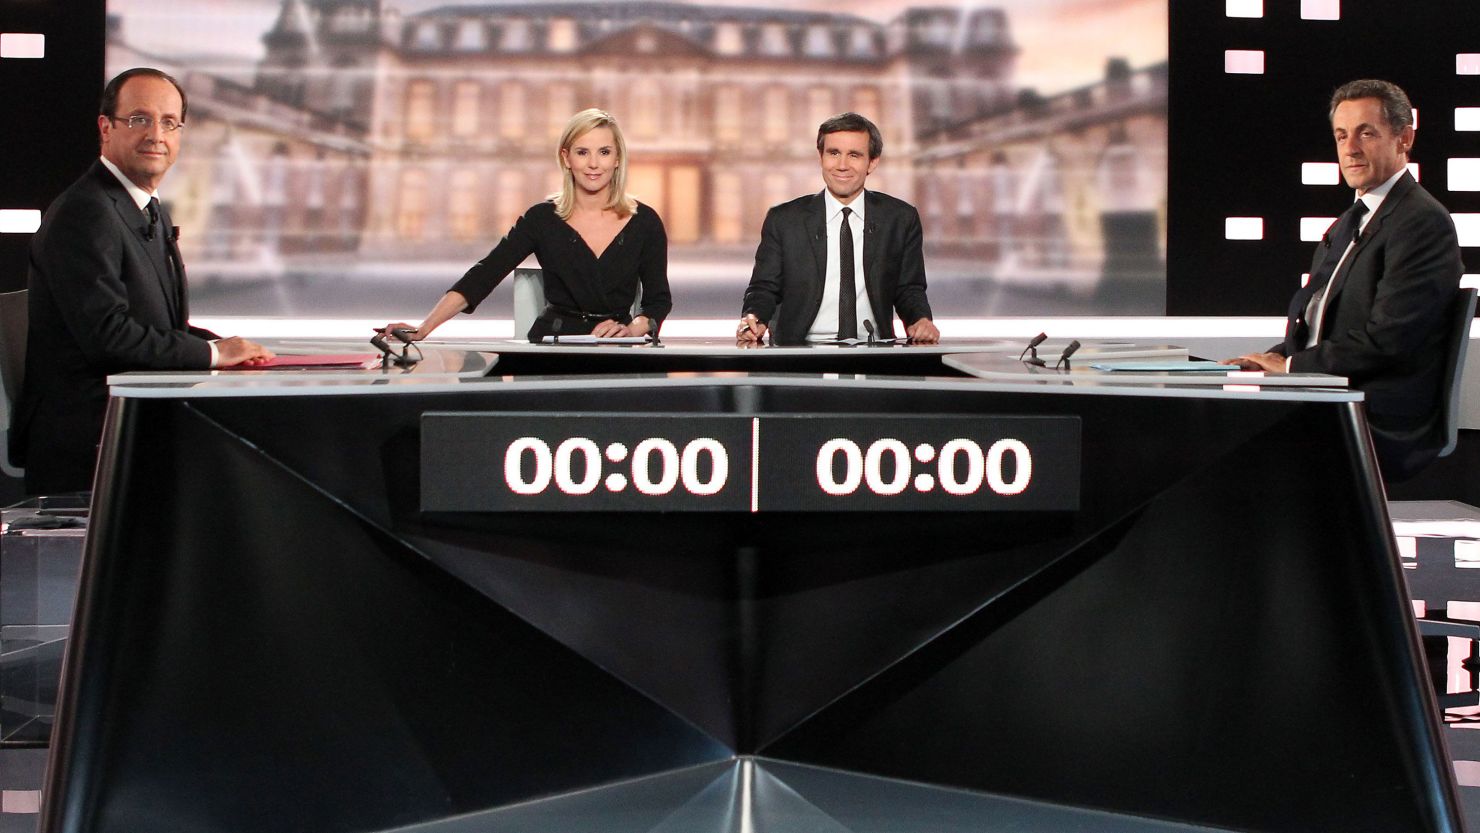 President Nicolas Sarkozy, right, faces his Socialist Party opponent Francois Hollande, left, during a televised debate in 2012. 
